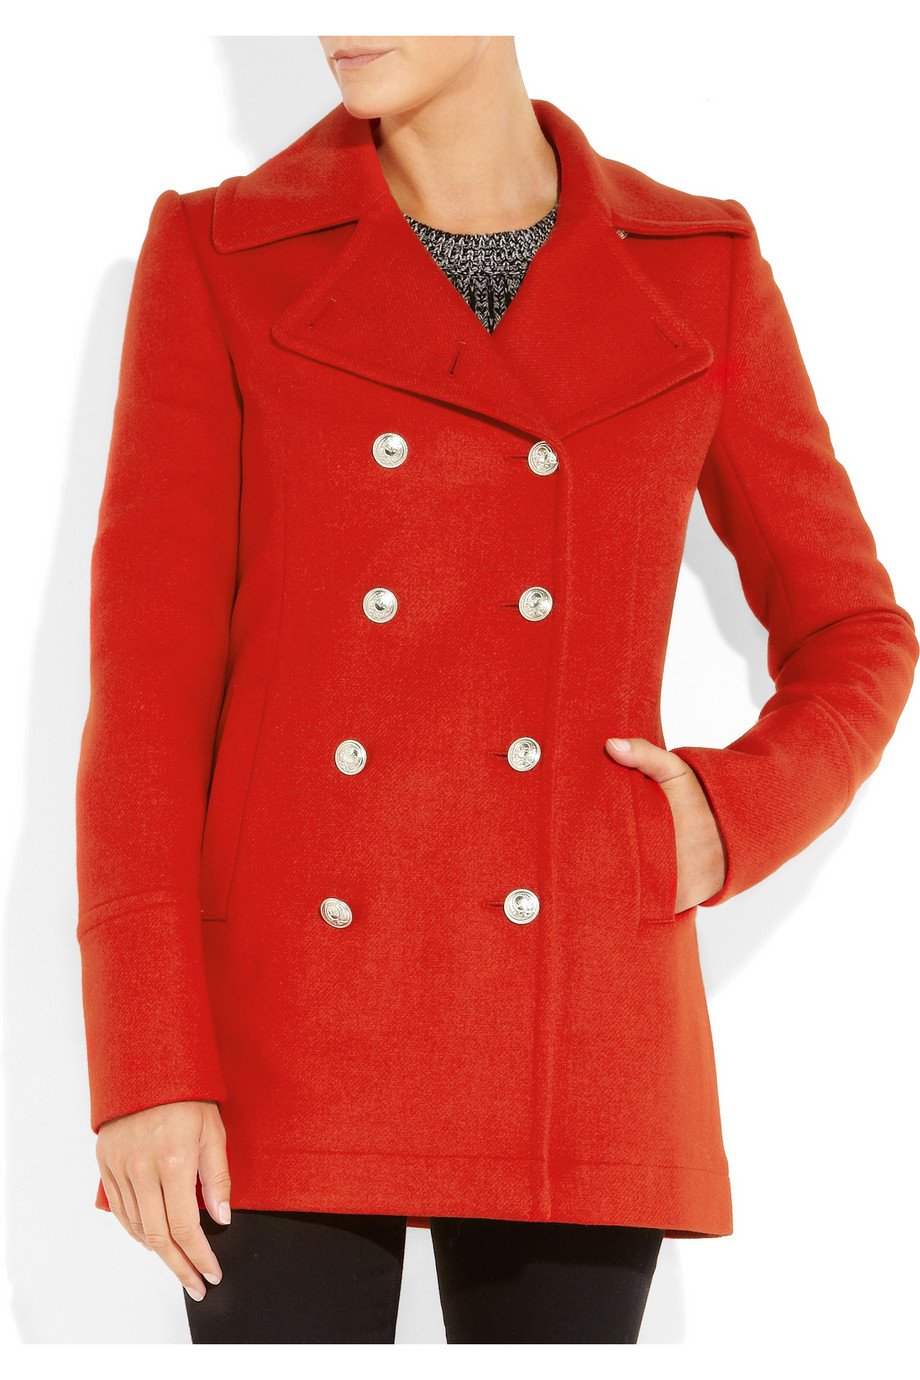 Lyst - Mcq Doublebreasted Woolblend Coat in Red